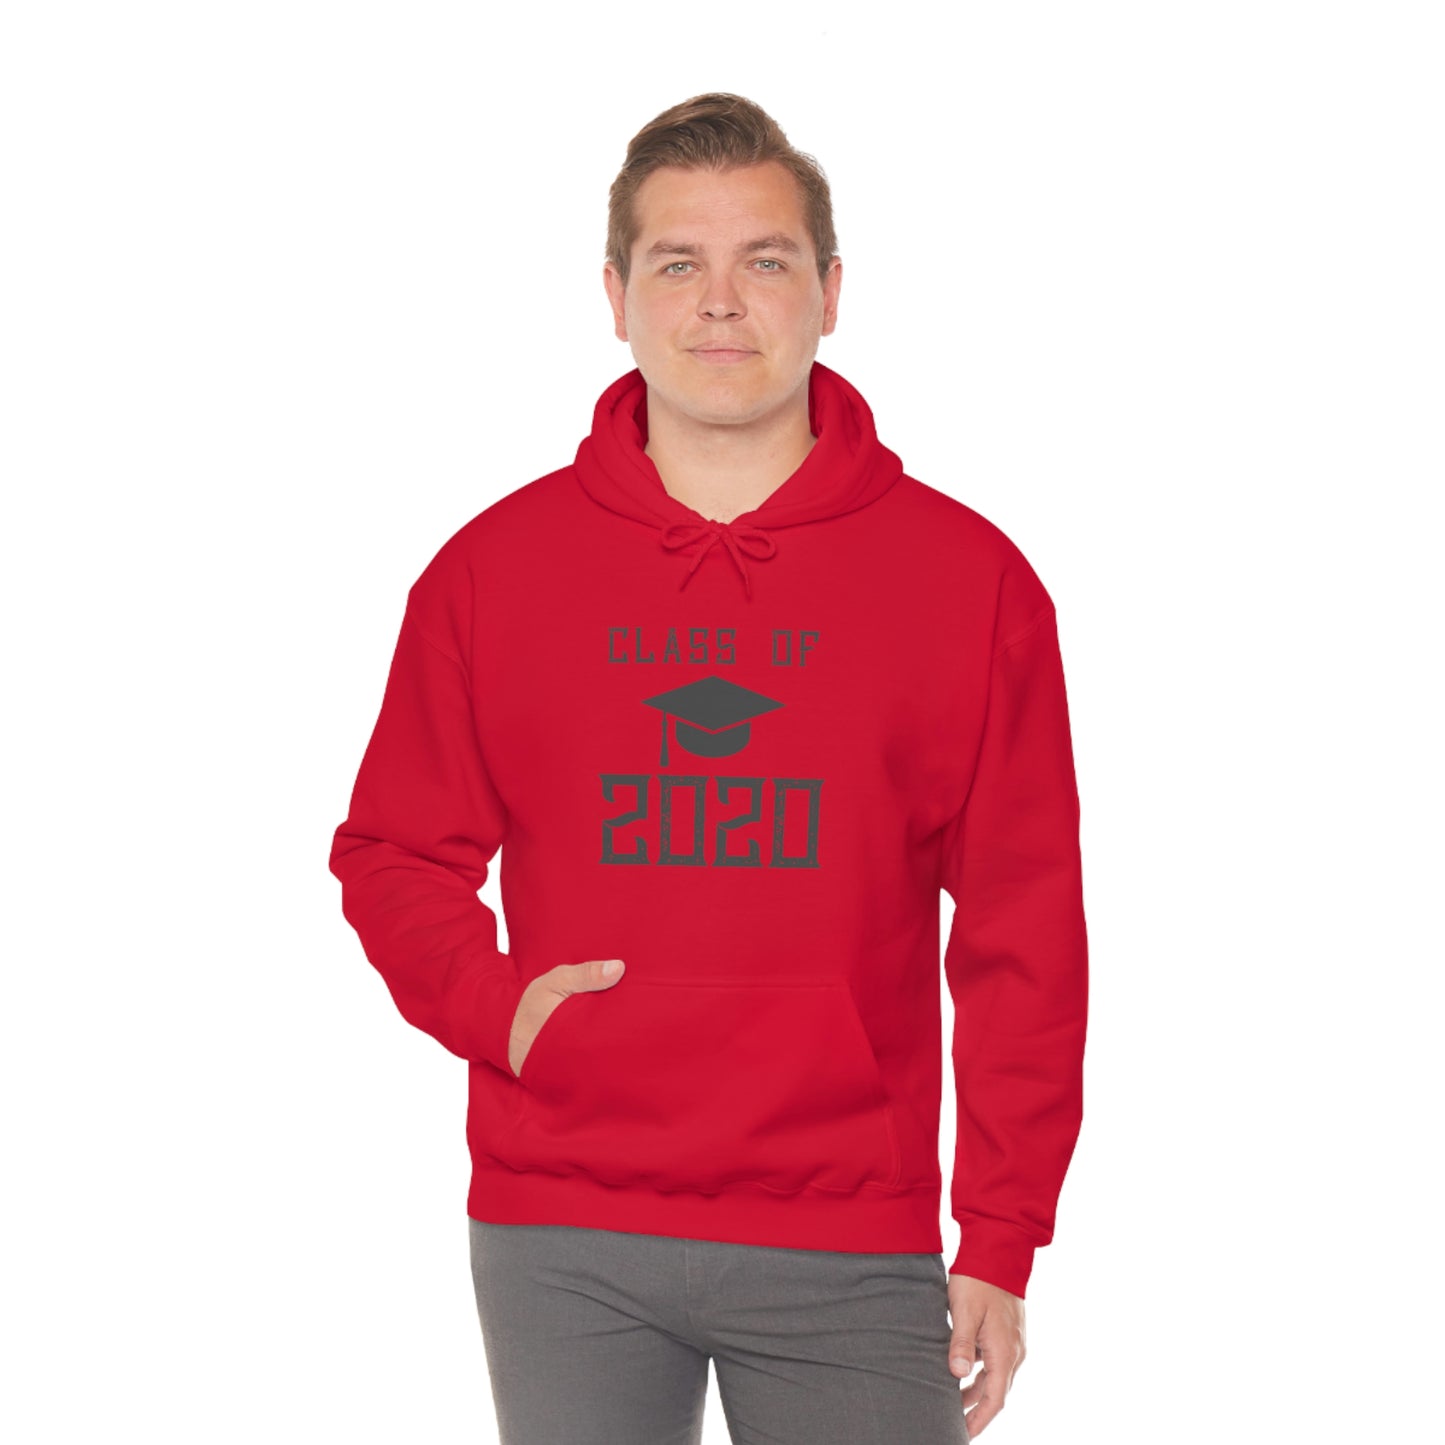 "Class Of 2020" Hoodie - Weave Got Gifts - Unique Gifts You Won’t Find Anywhere Else!